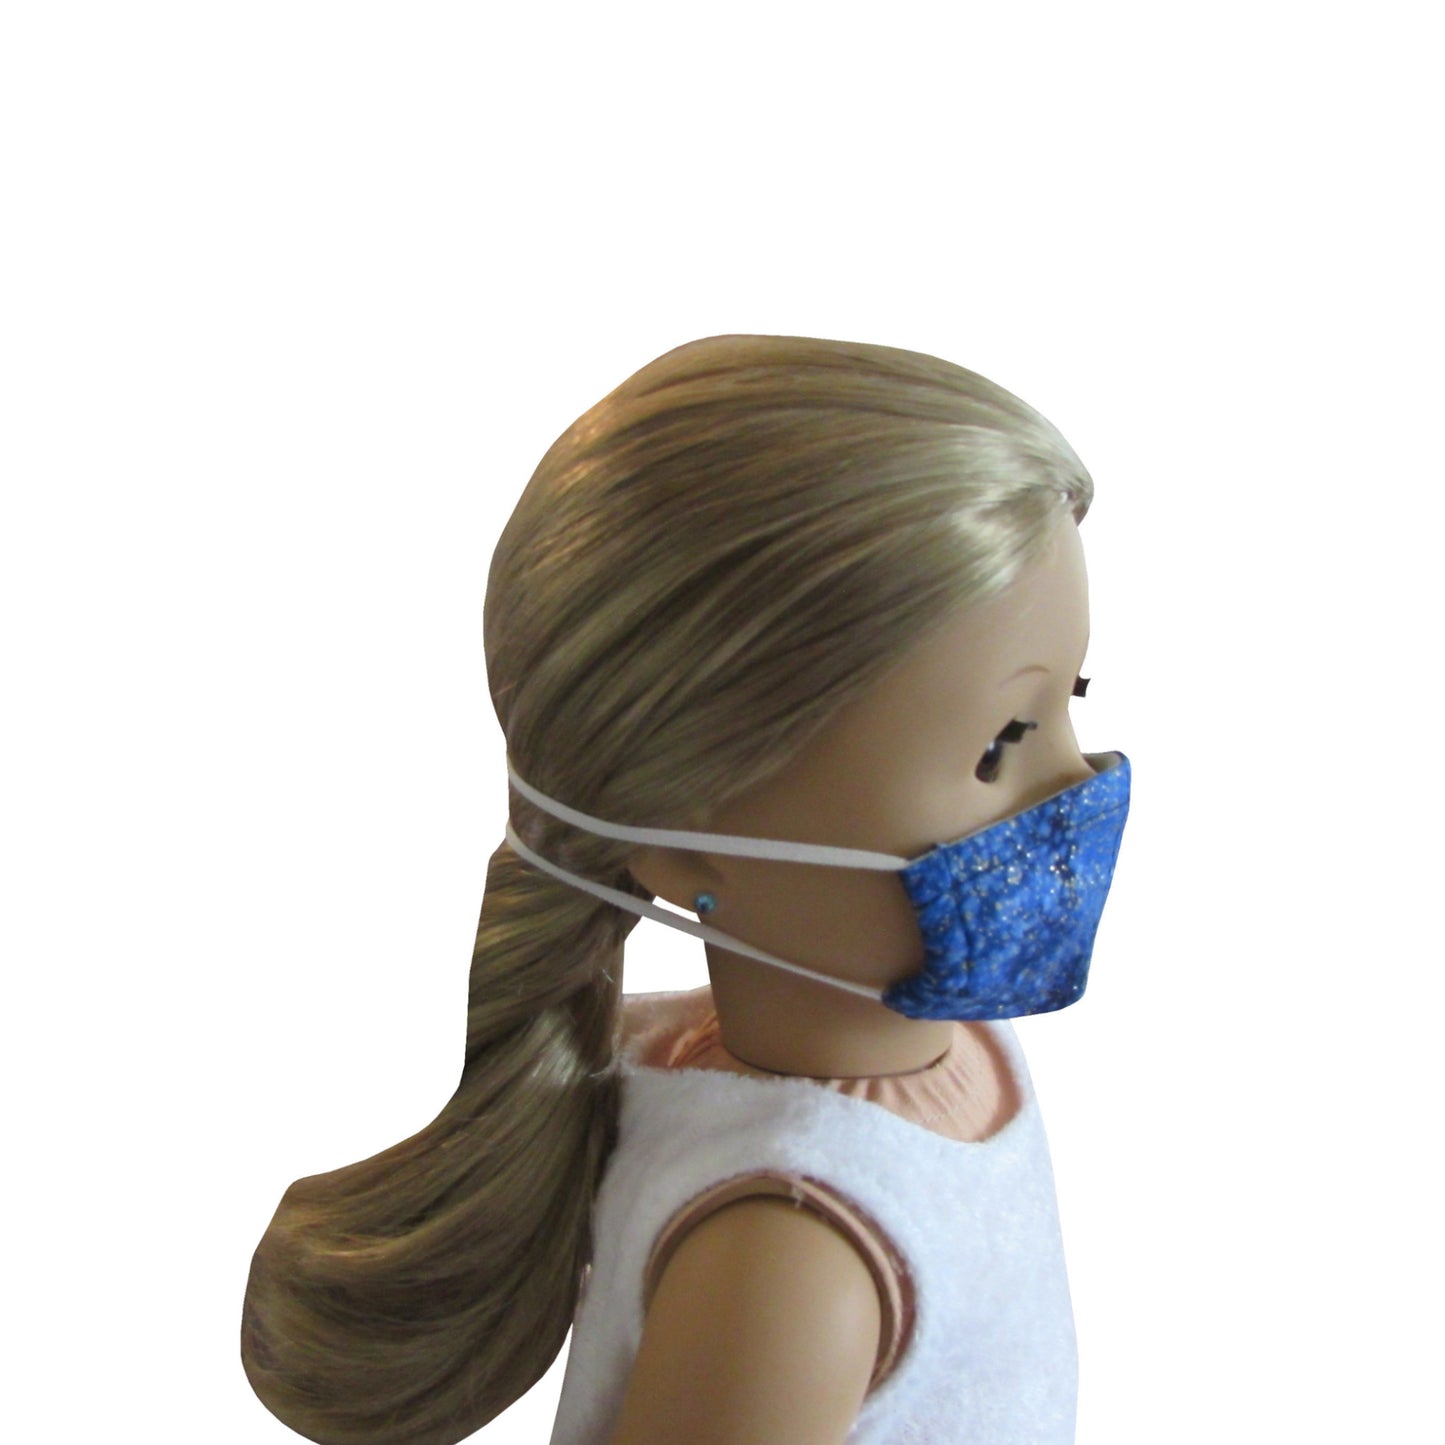 Metallic Blue Print Doll Face Mask for 18-inch dolls with American Girl Doll Side